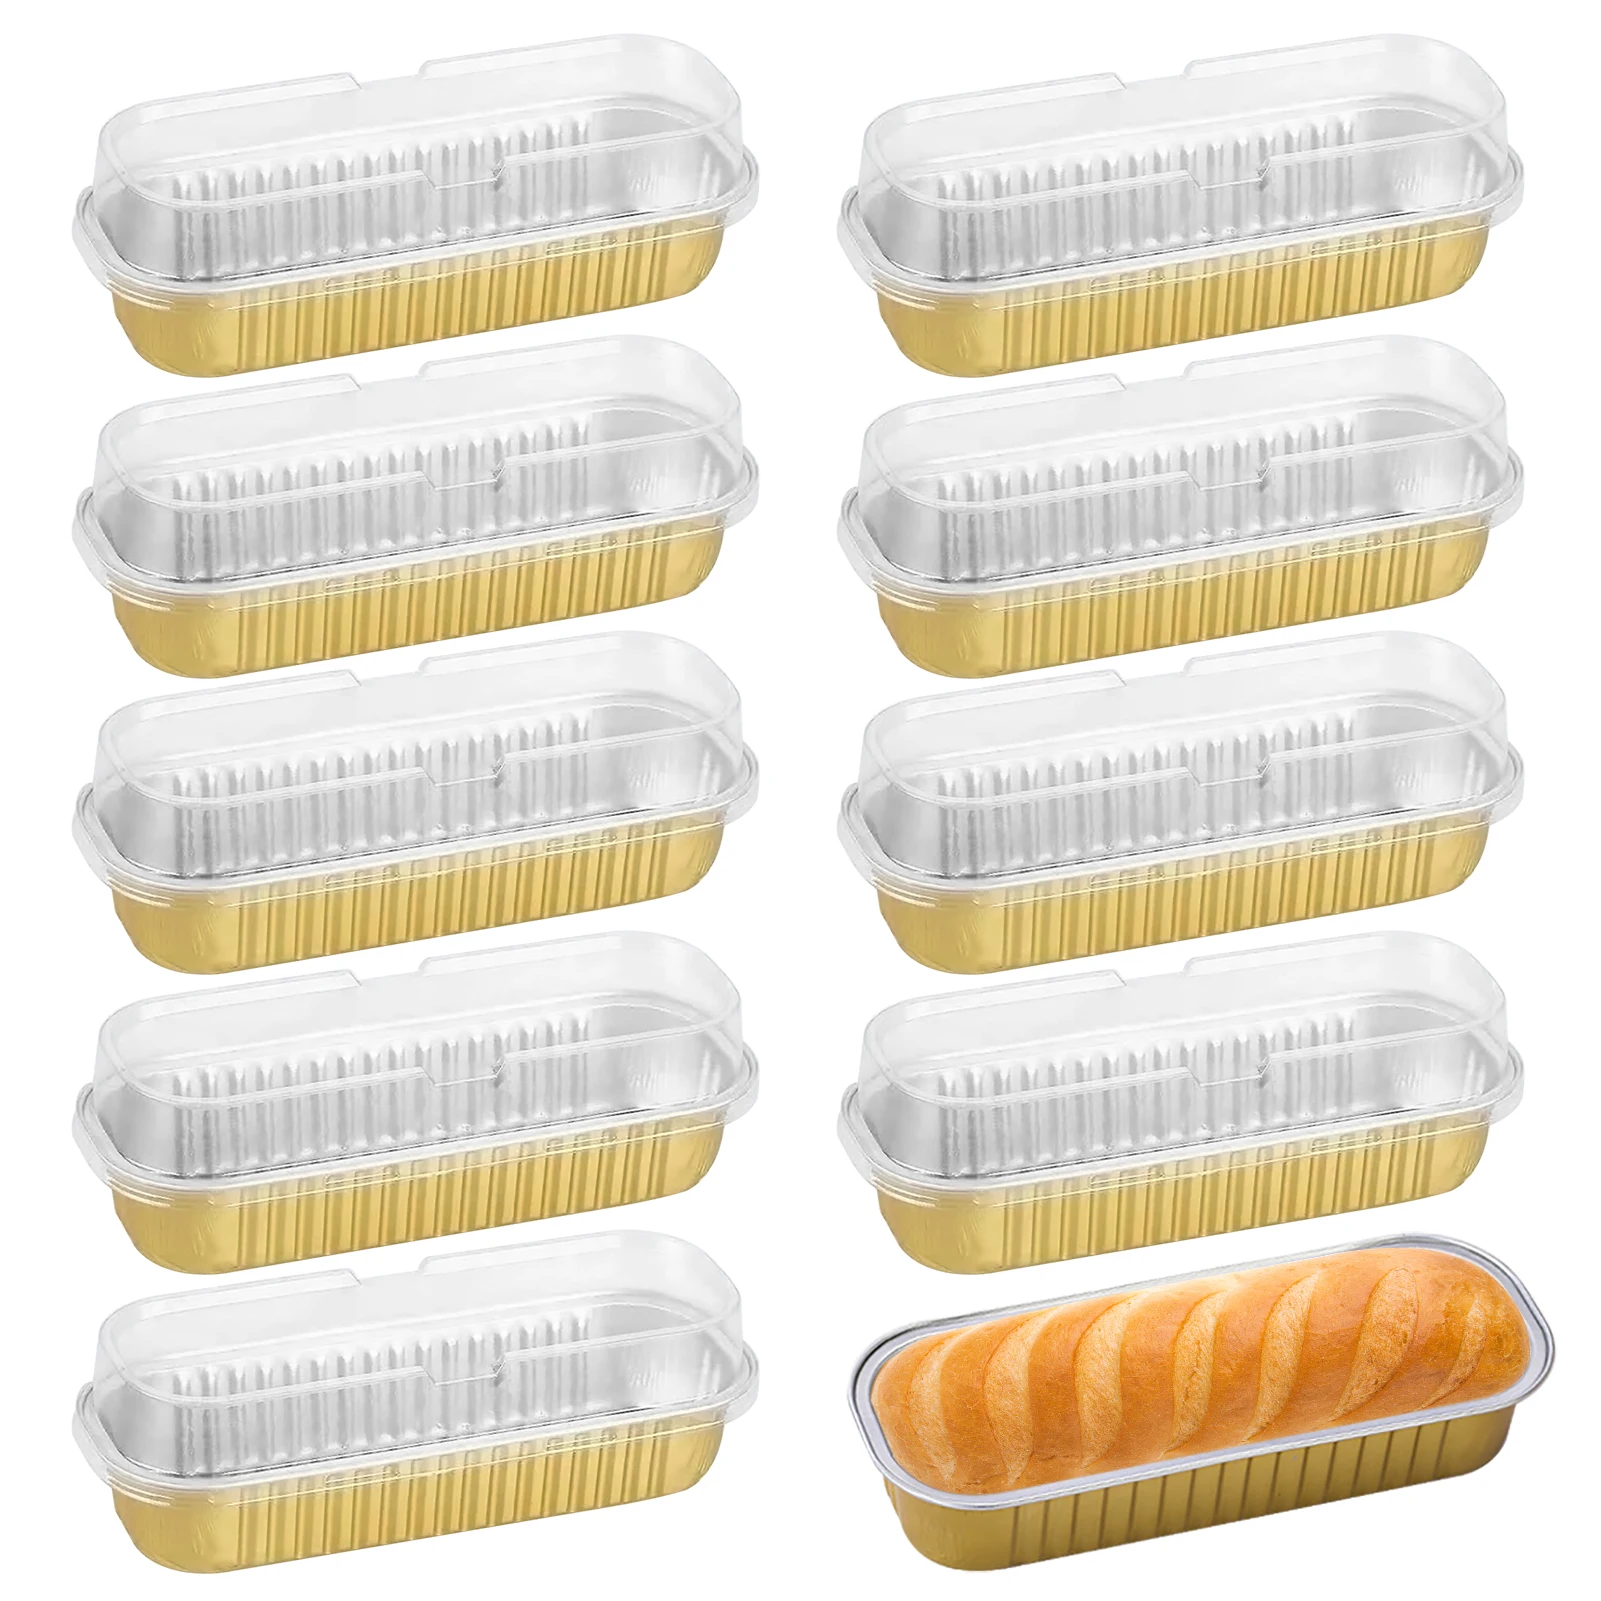 

50pcs Aluminum Foil With Lids Tins Liners Muffin Disposable Cheesecake Mini Loaf Baking Pan Cupcake Flans For Bread Rectangle